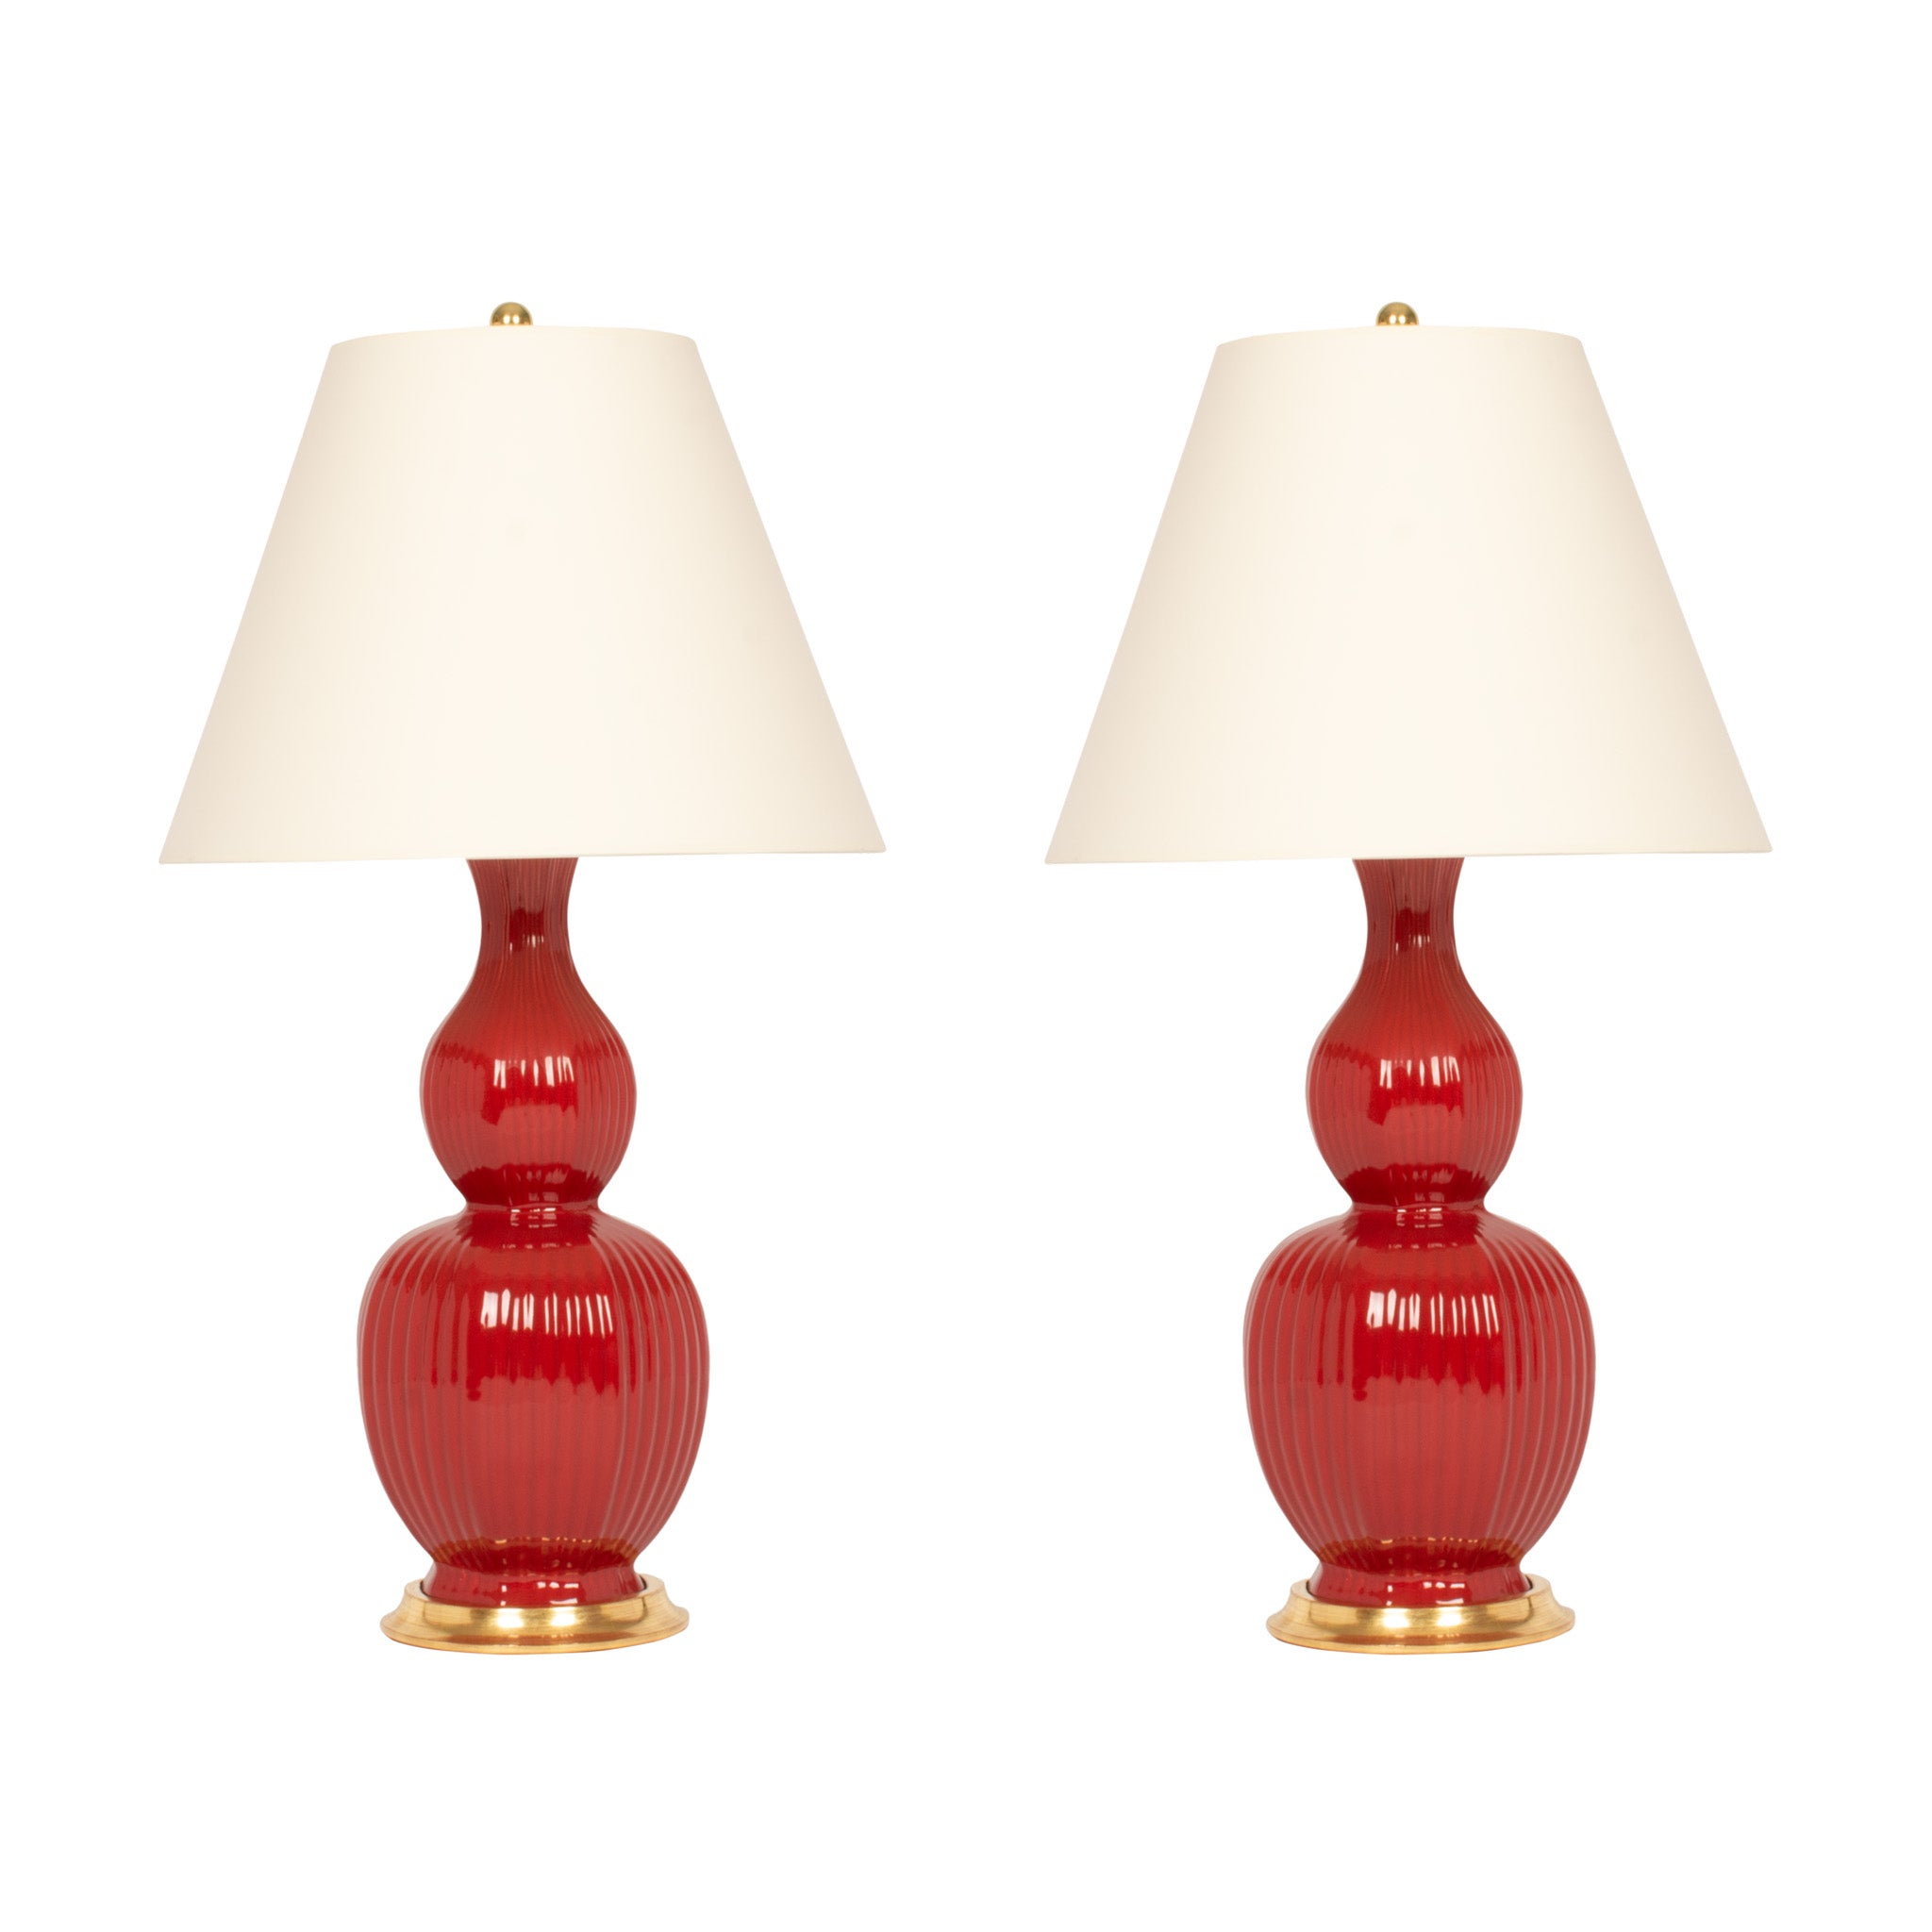 Pair of Delft Lamps in Scarlet